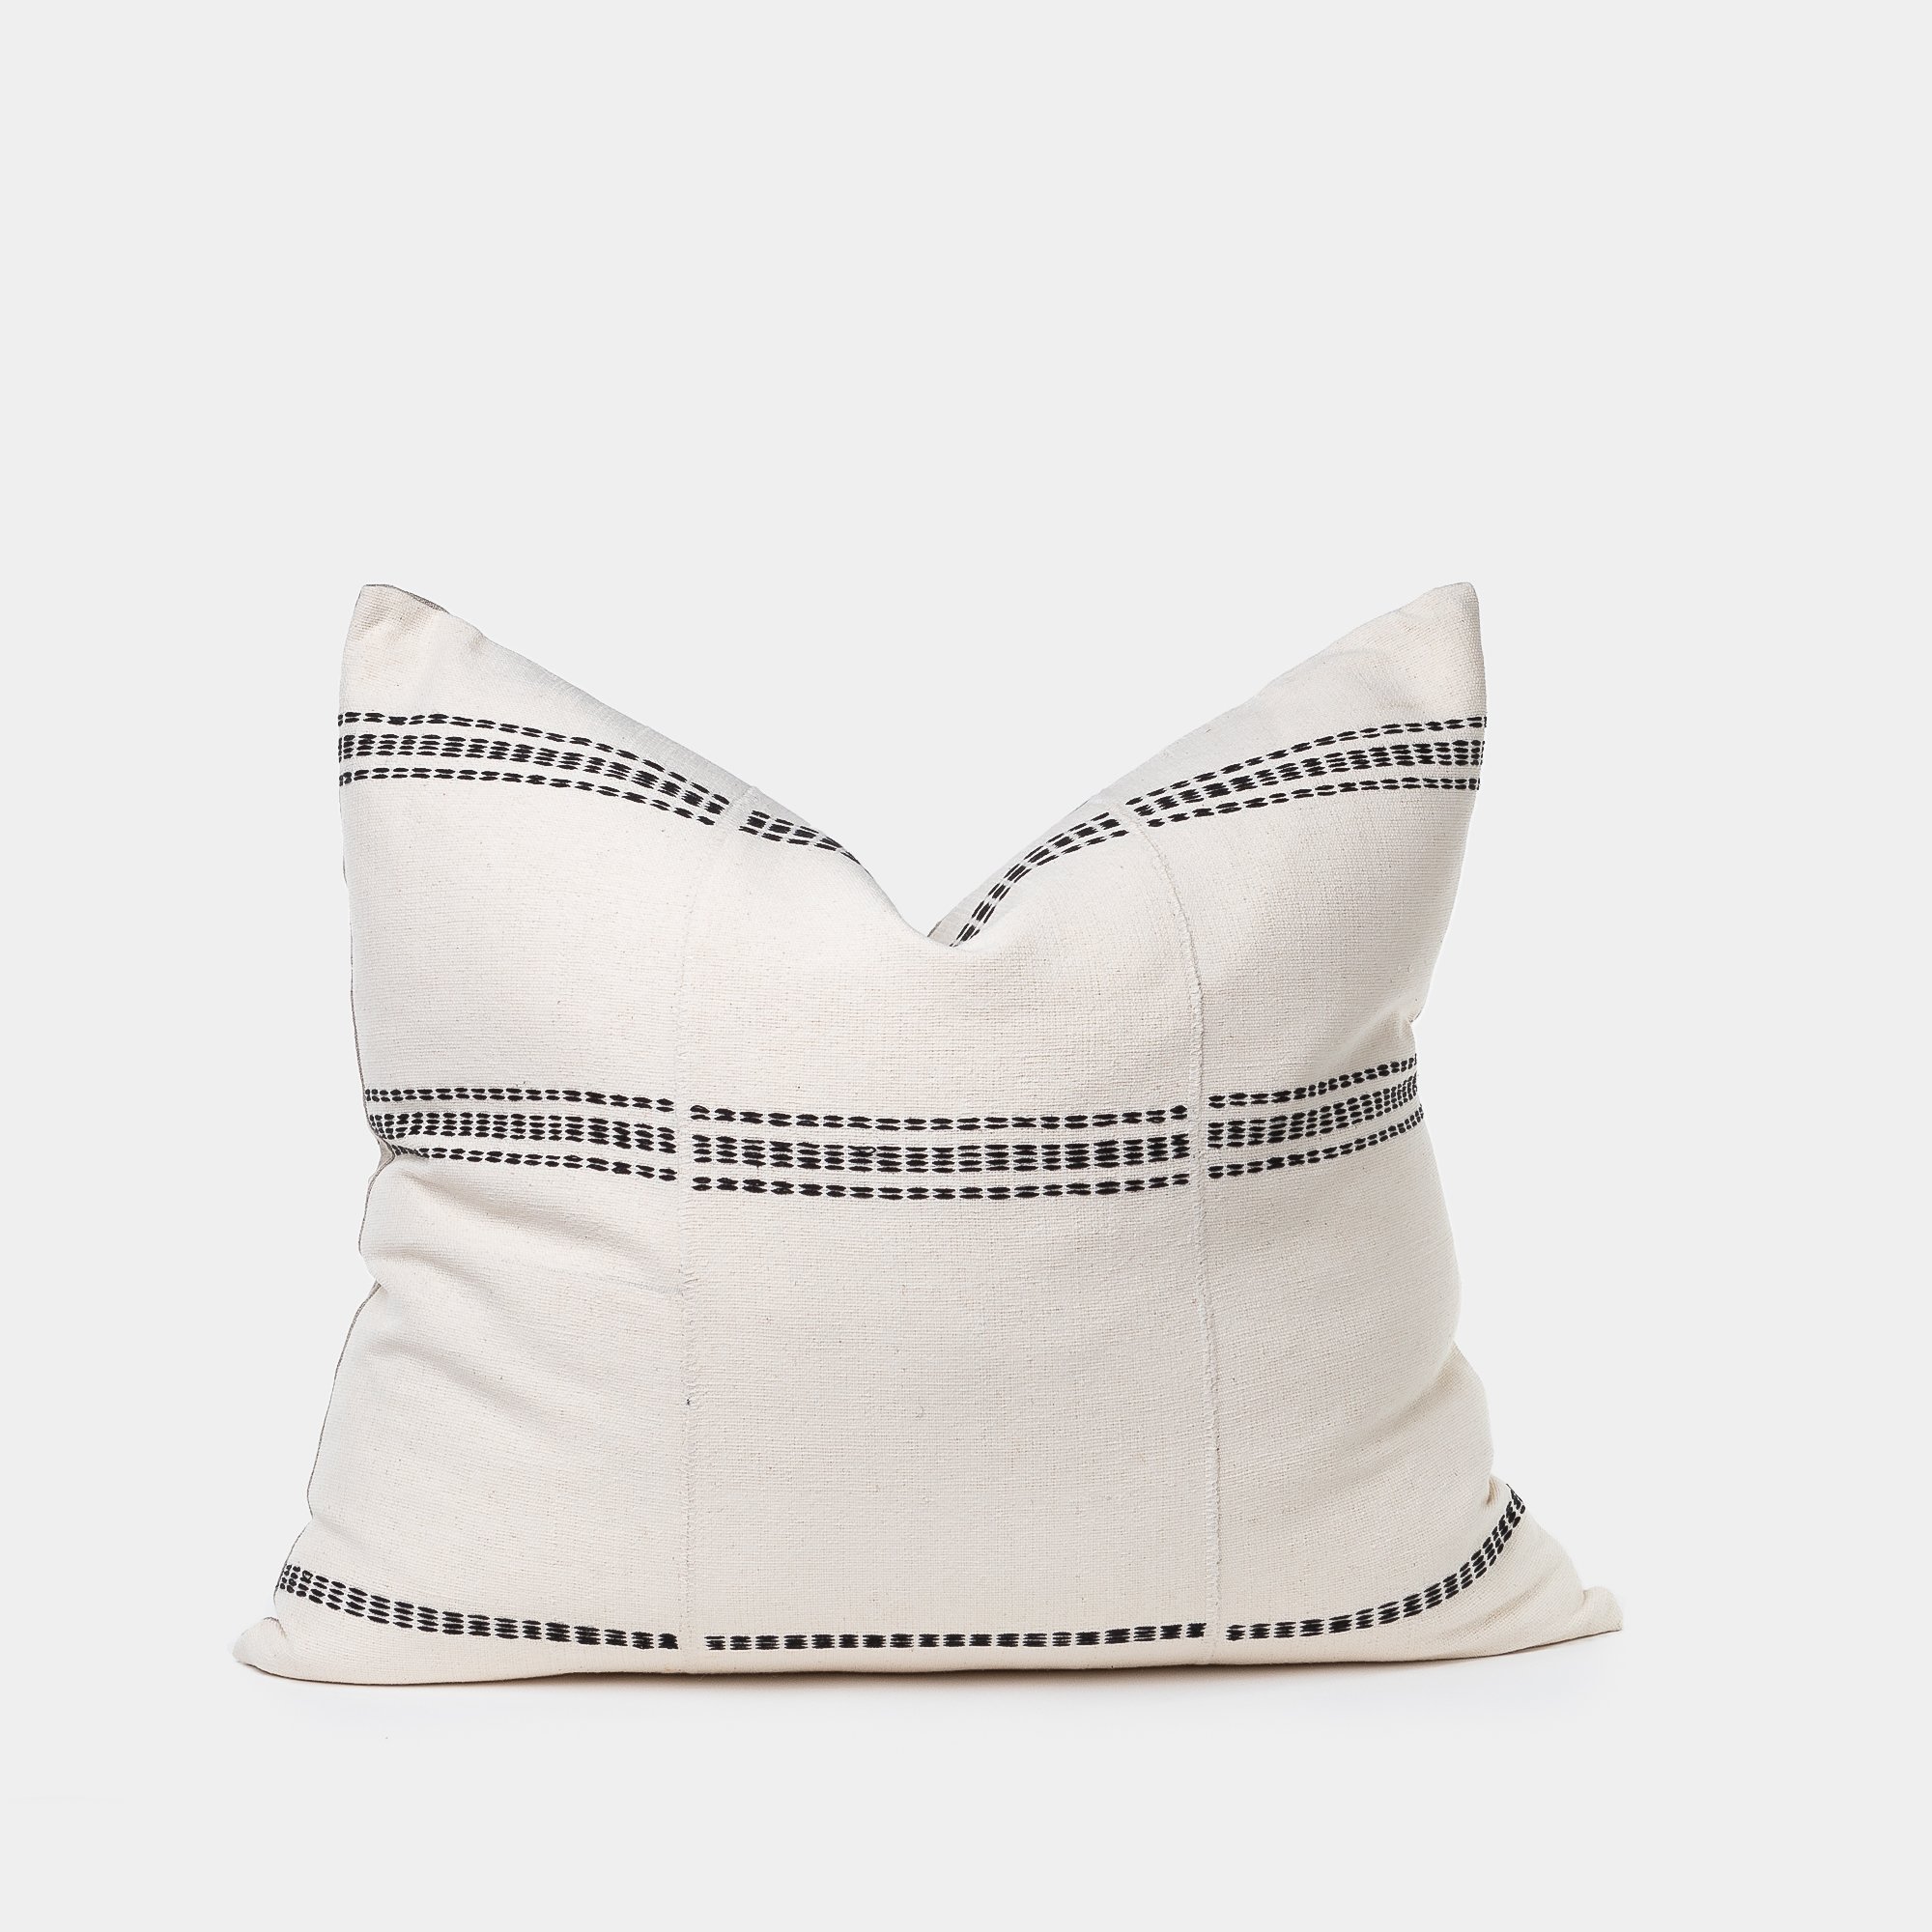 ALL-SORTS-OF-SHOPPE-ABIEL-PILLOW